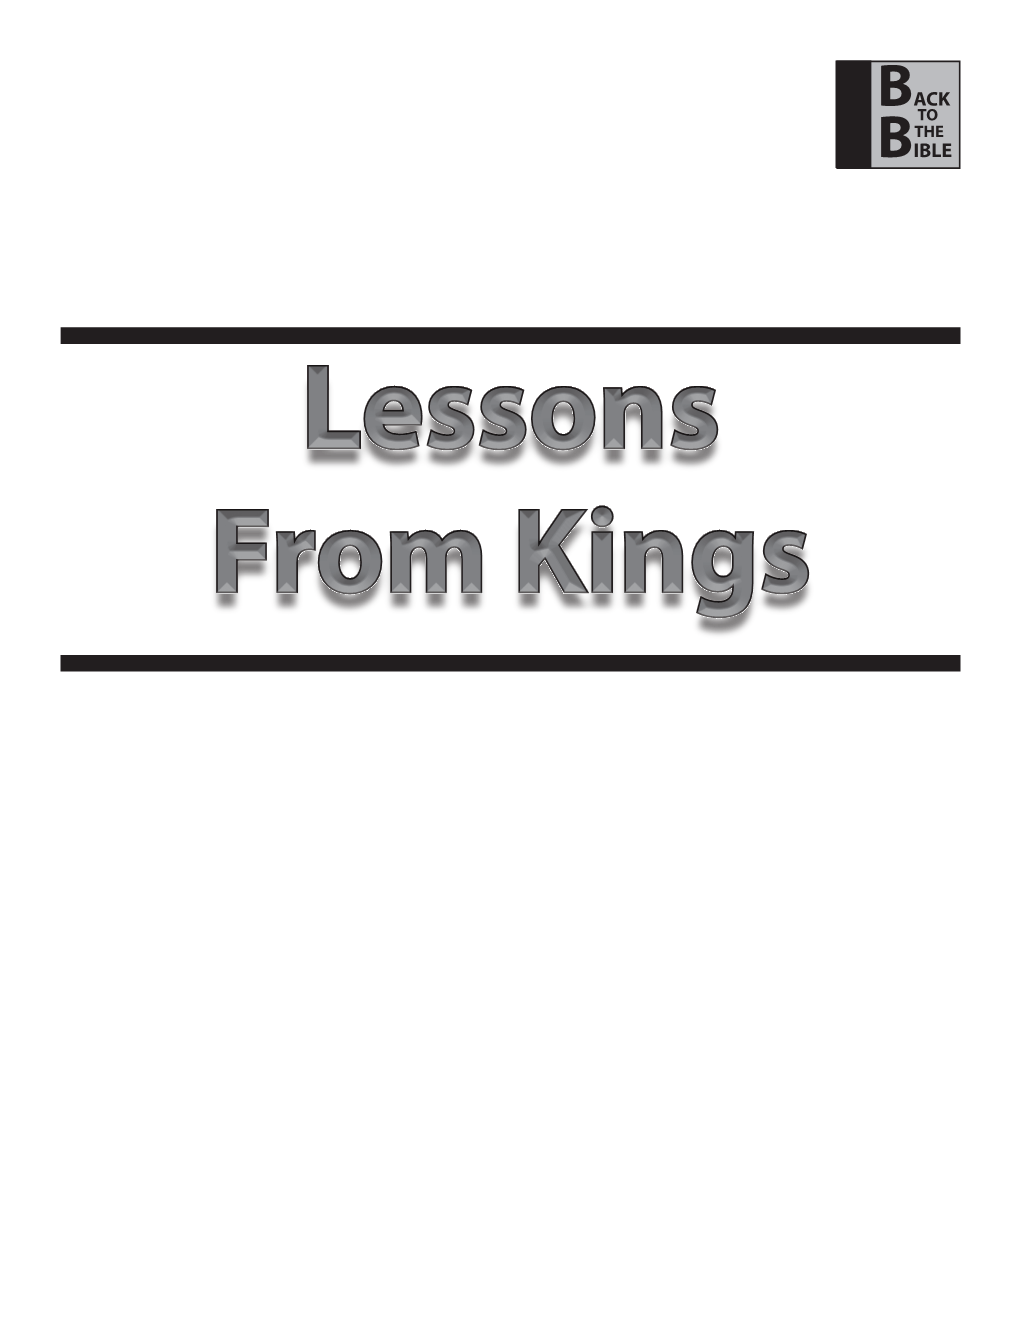 Lessons from Kings – 12 Lessons